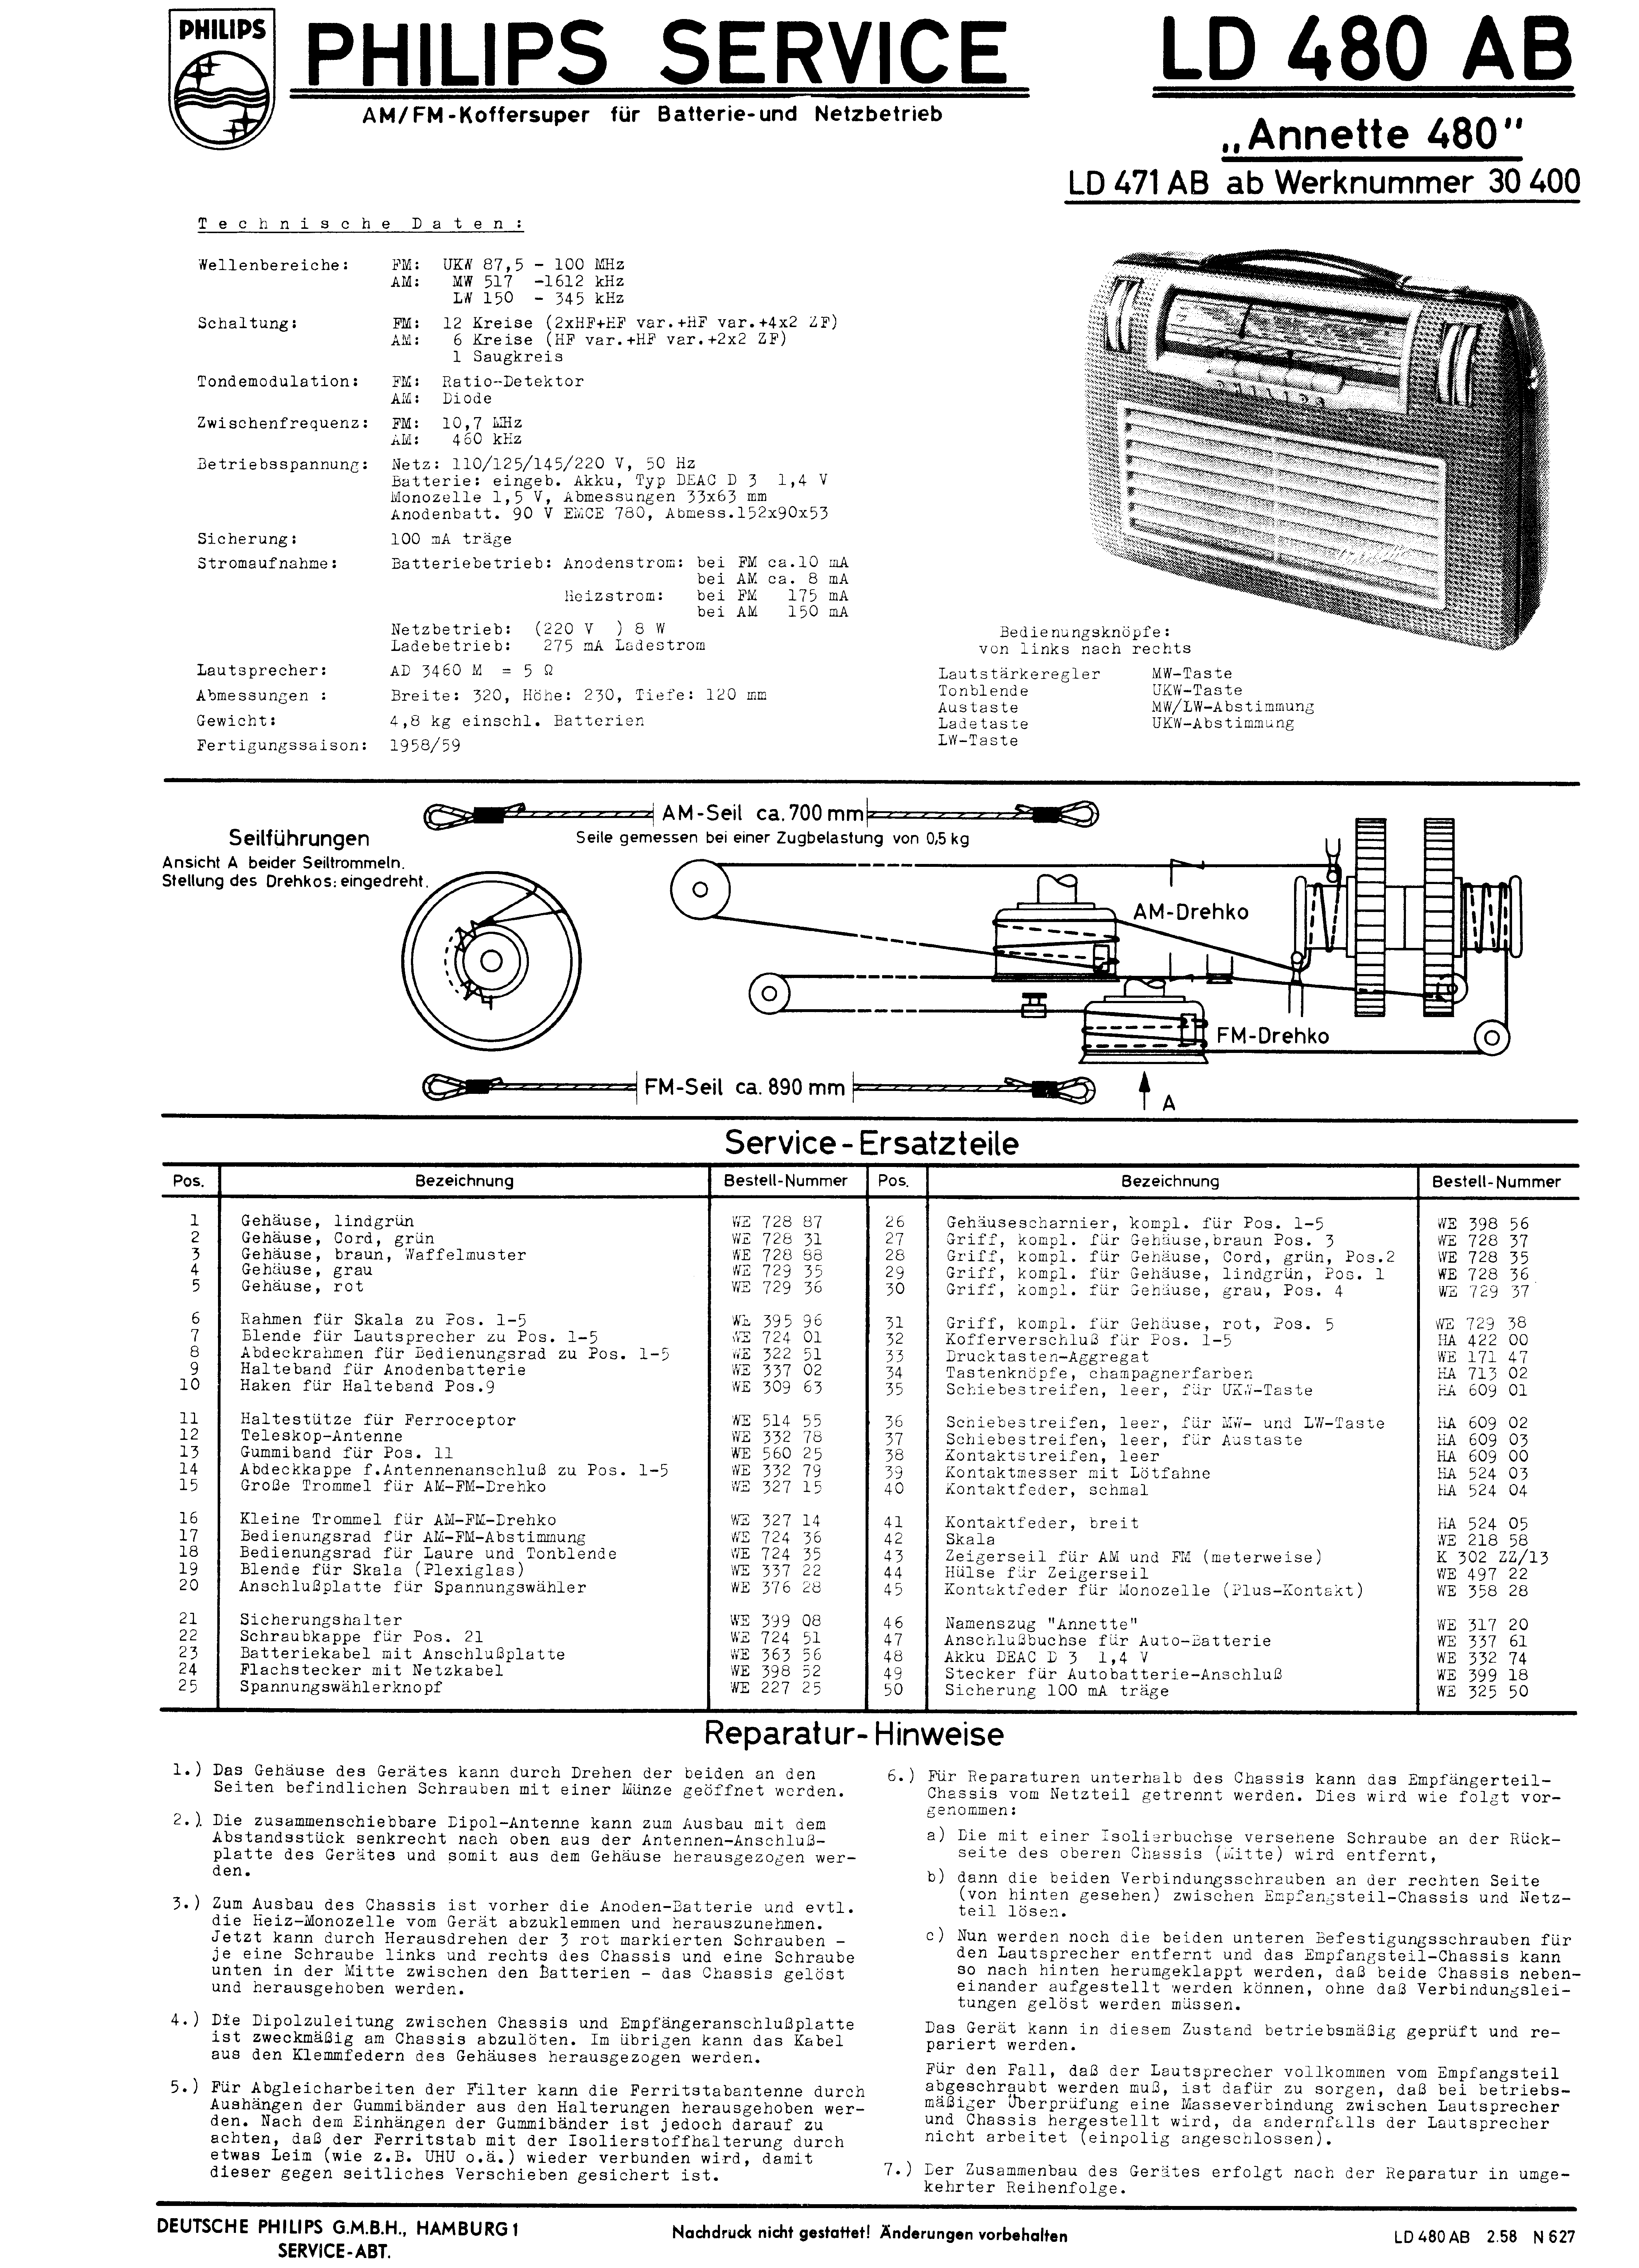 PHILIPS LD 480 AB ANNETTE 480 SM service manual (1st page)